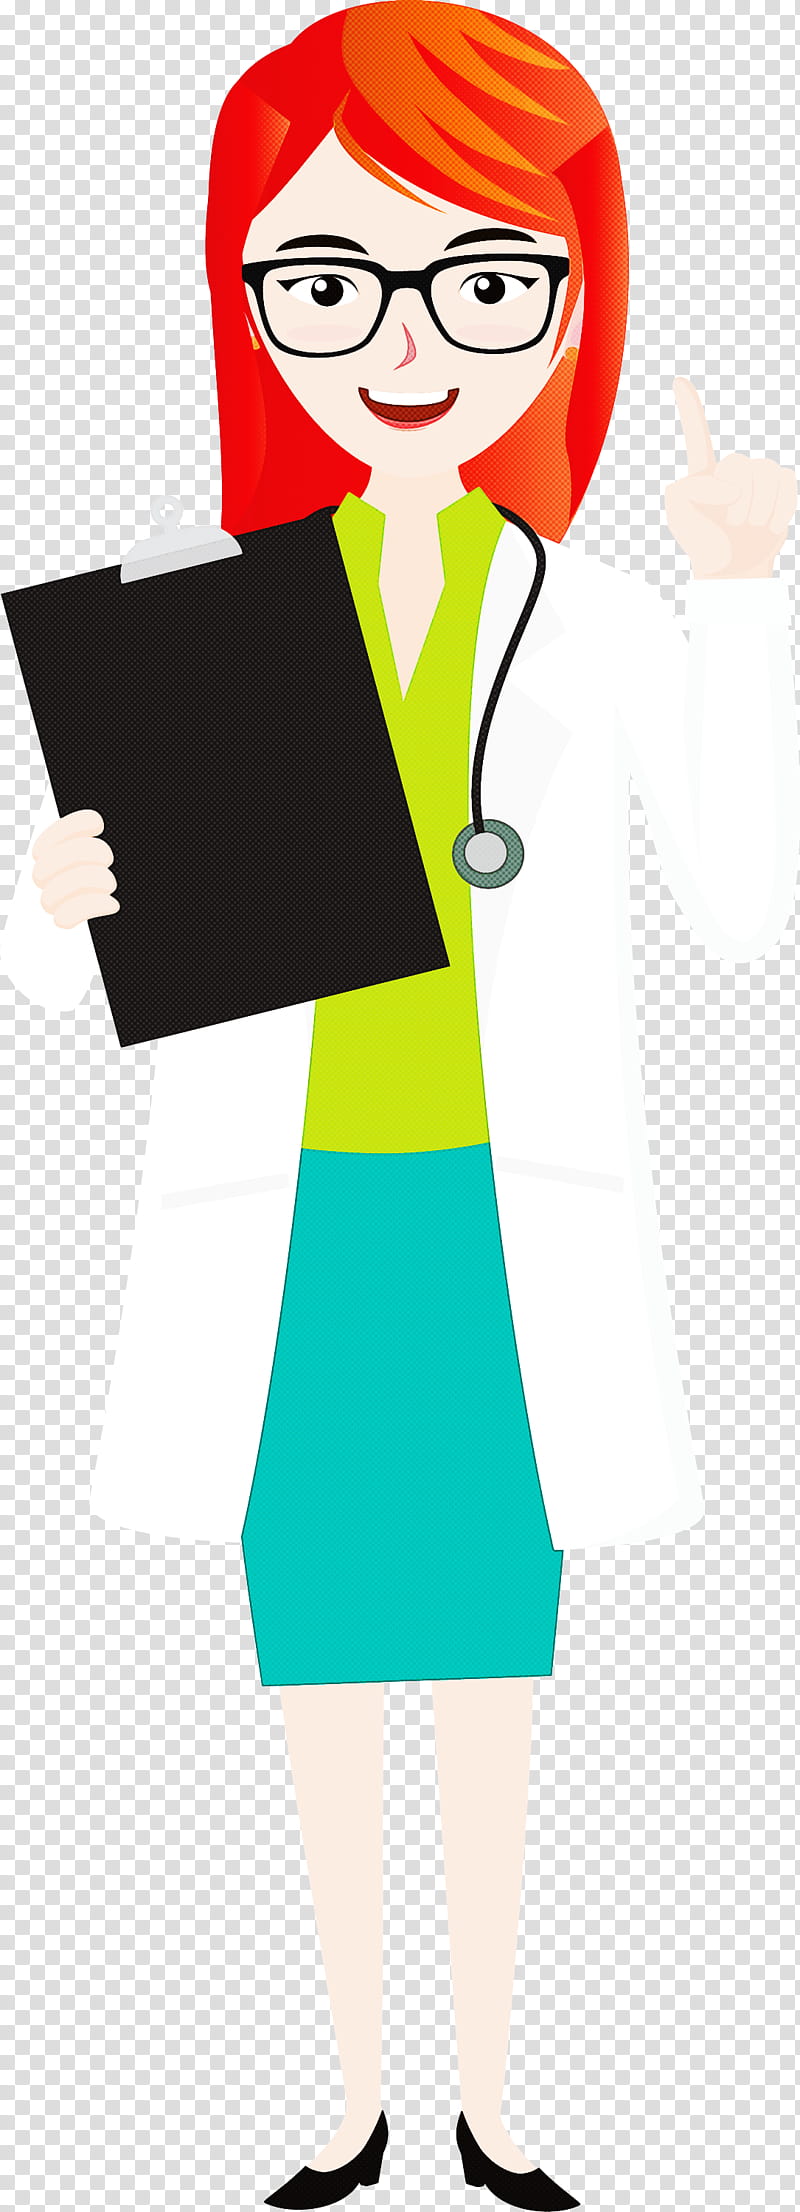 Glasses, Doctor Cartoon, Physician, Medicine, Health, SURGEON, Medical Diagnosis, Family Medicine transparent background PNG clipart